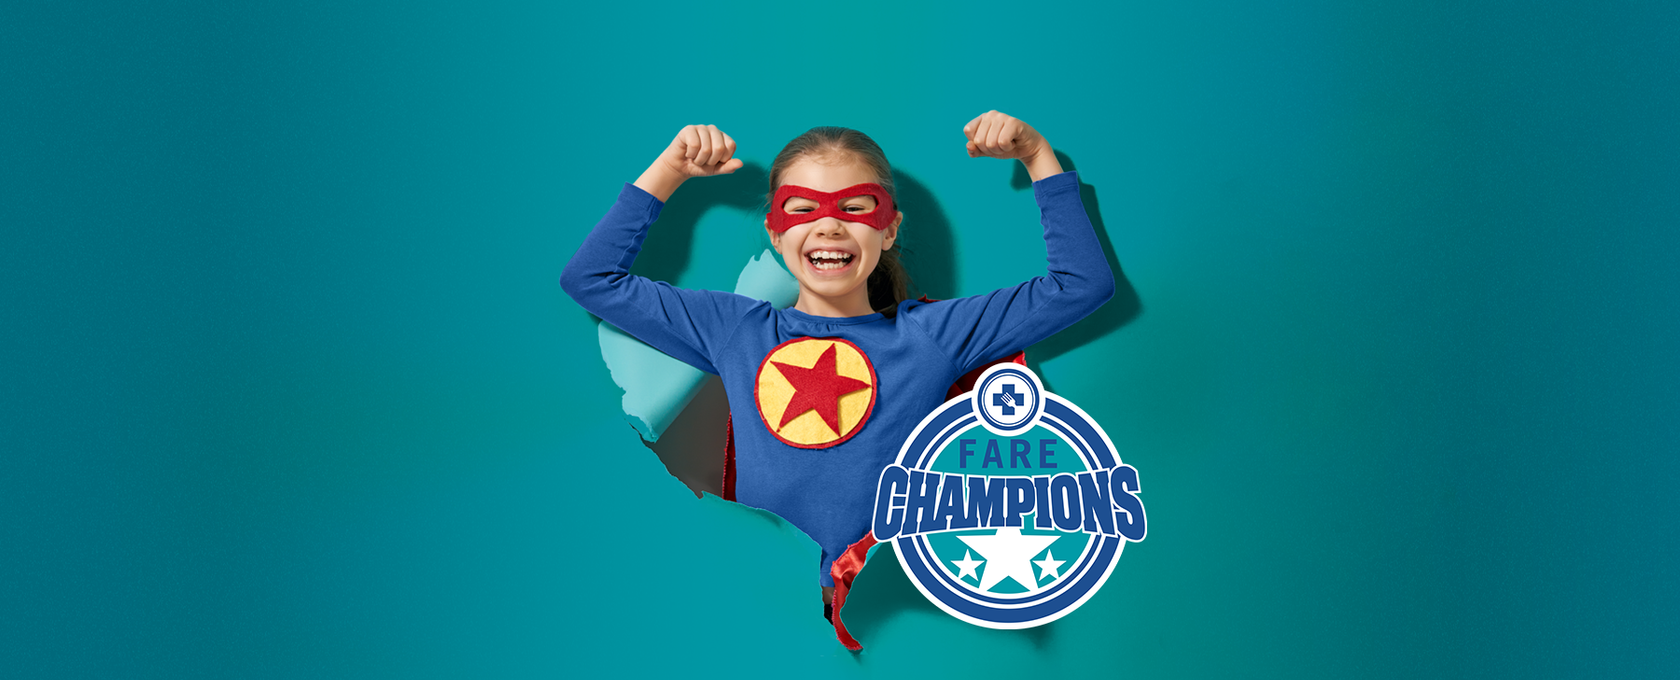 Super girl breaking through teal paper with FARE Champions logo